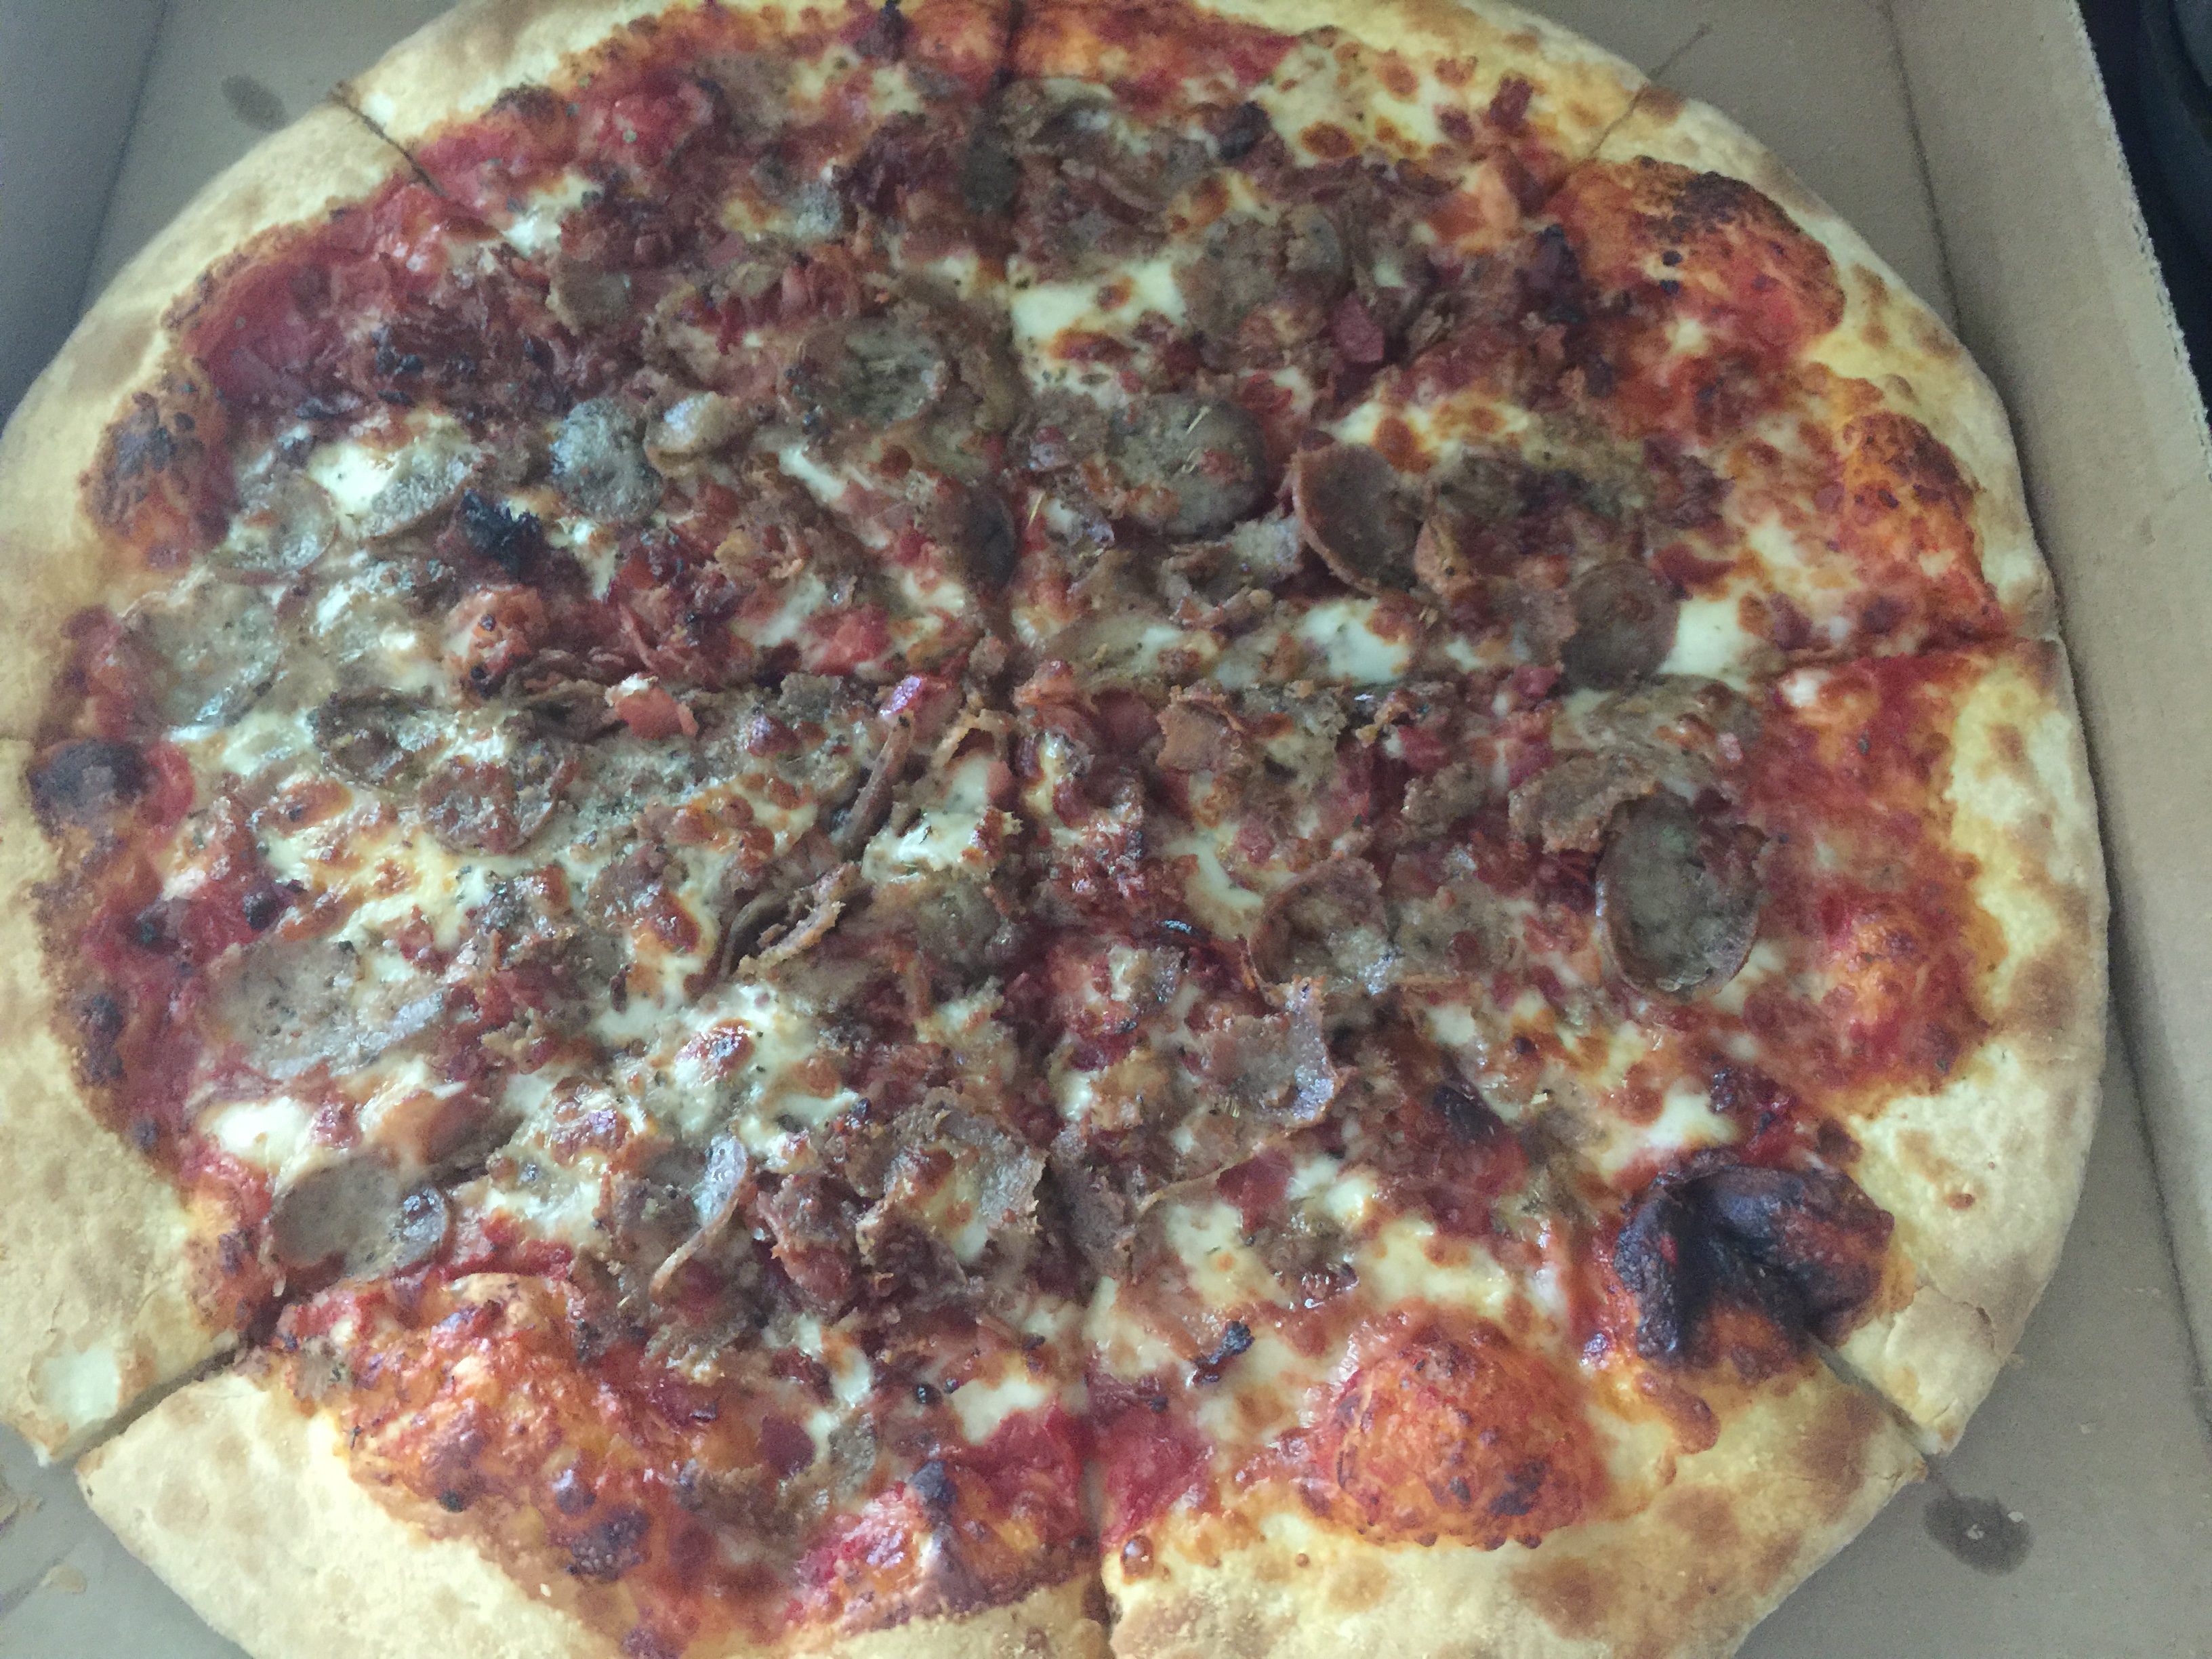 Large Bacon and Sausage Pizza